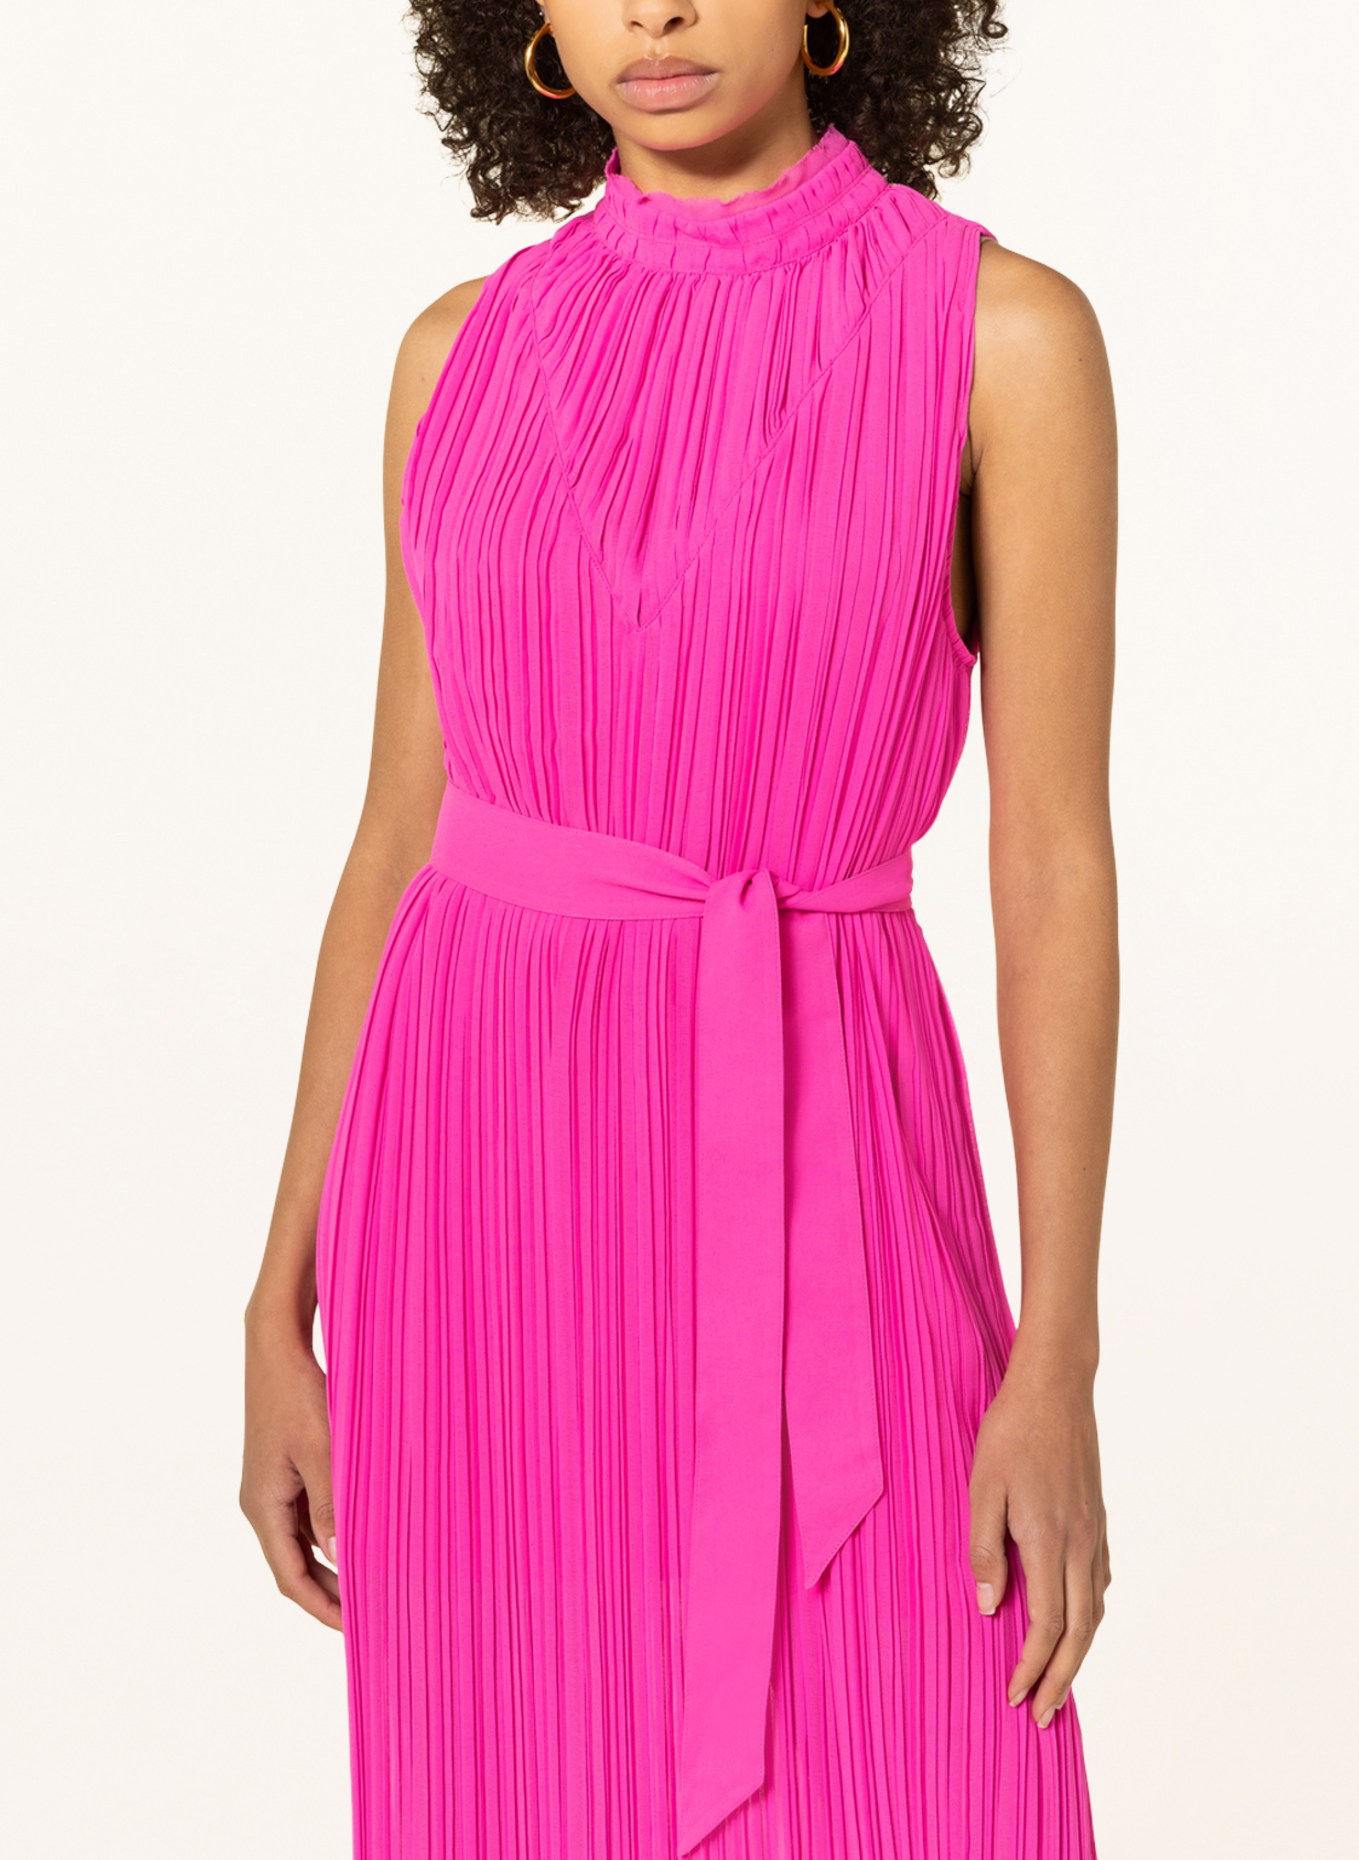 DANTE6 Pleated dress TRIXIE, Color: PINK (Image 4)